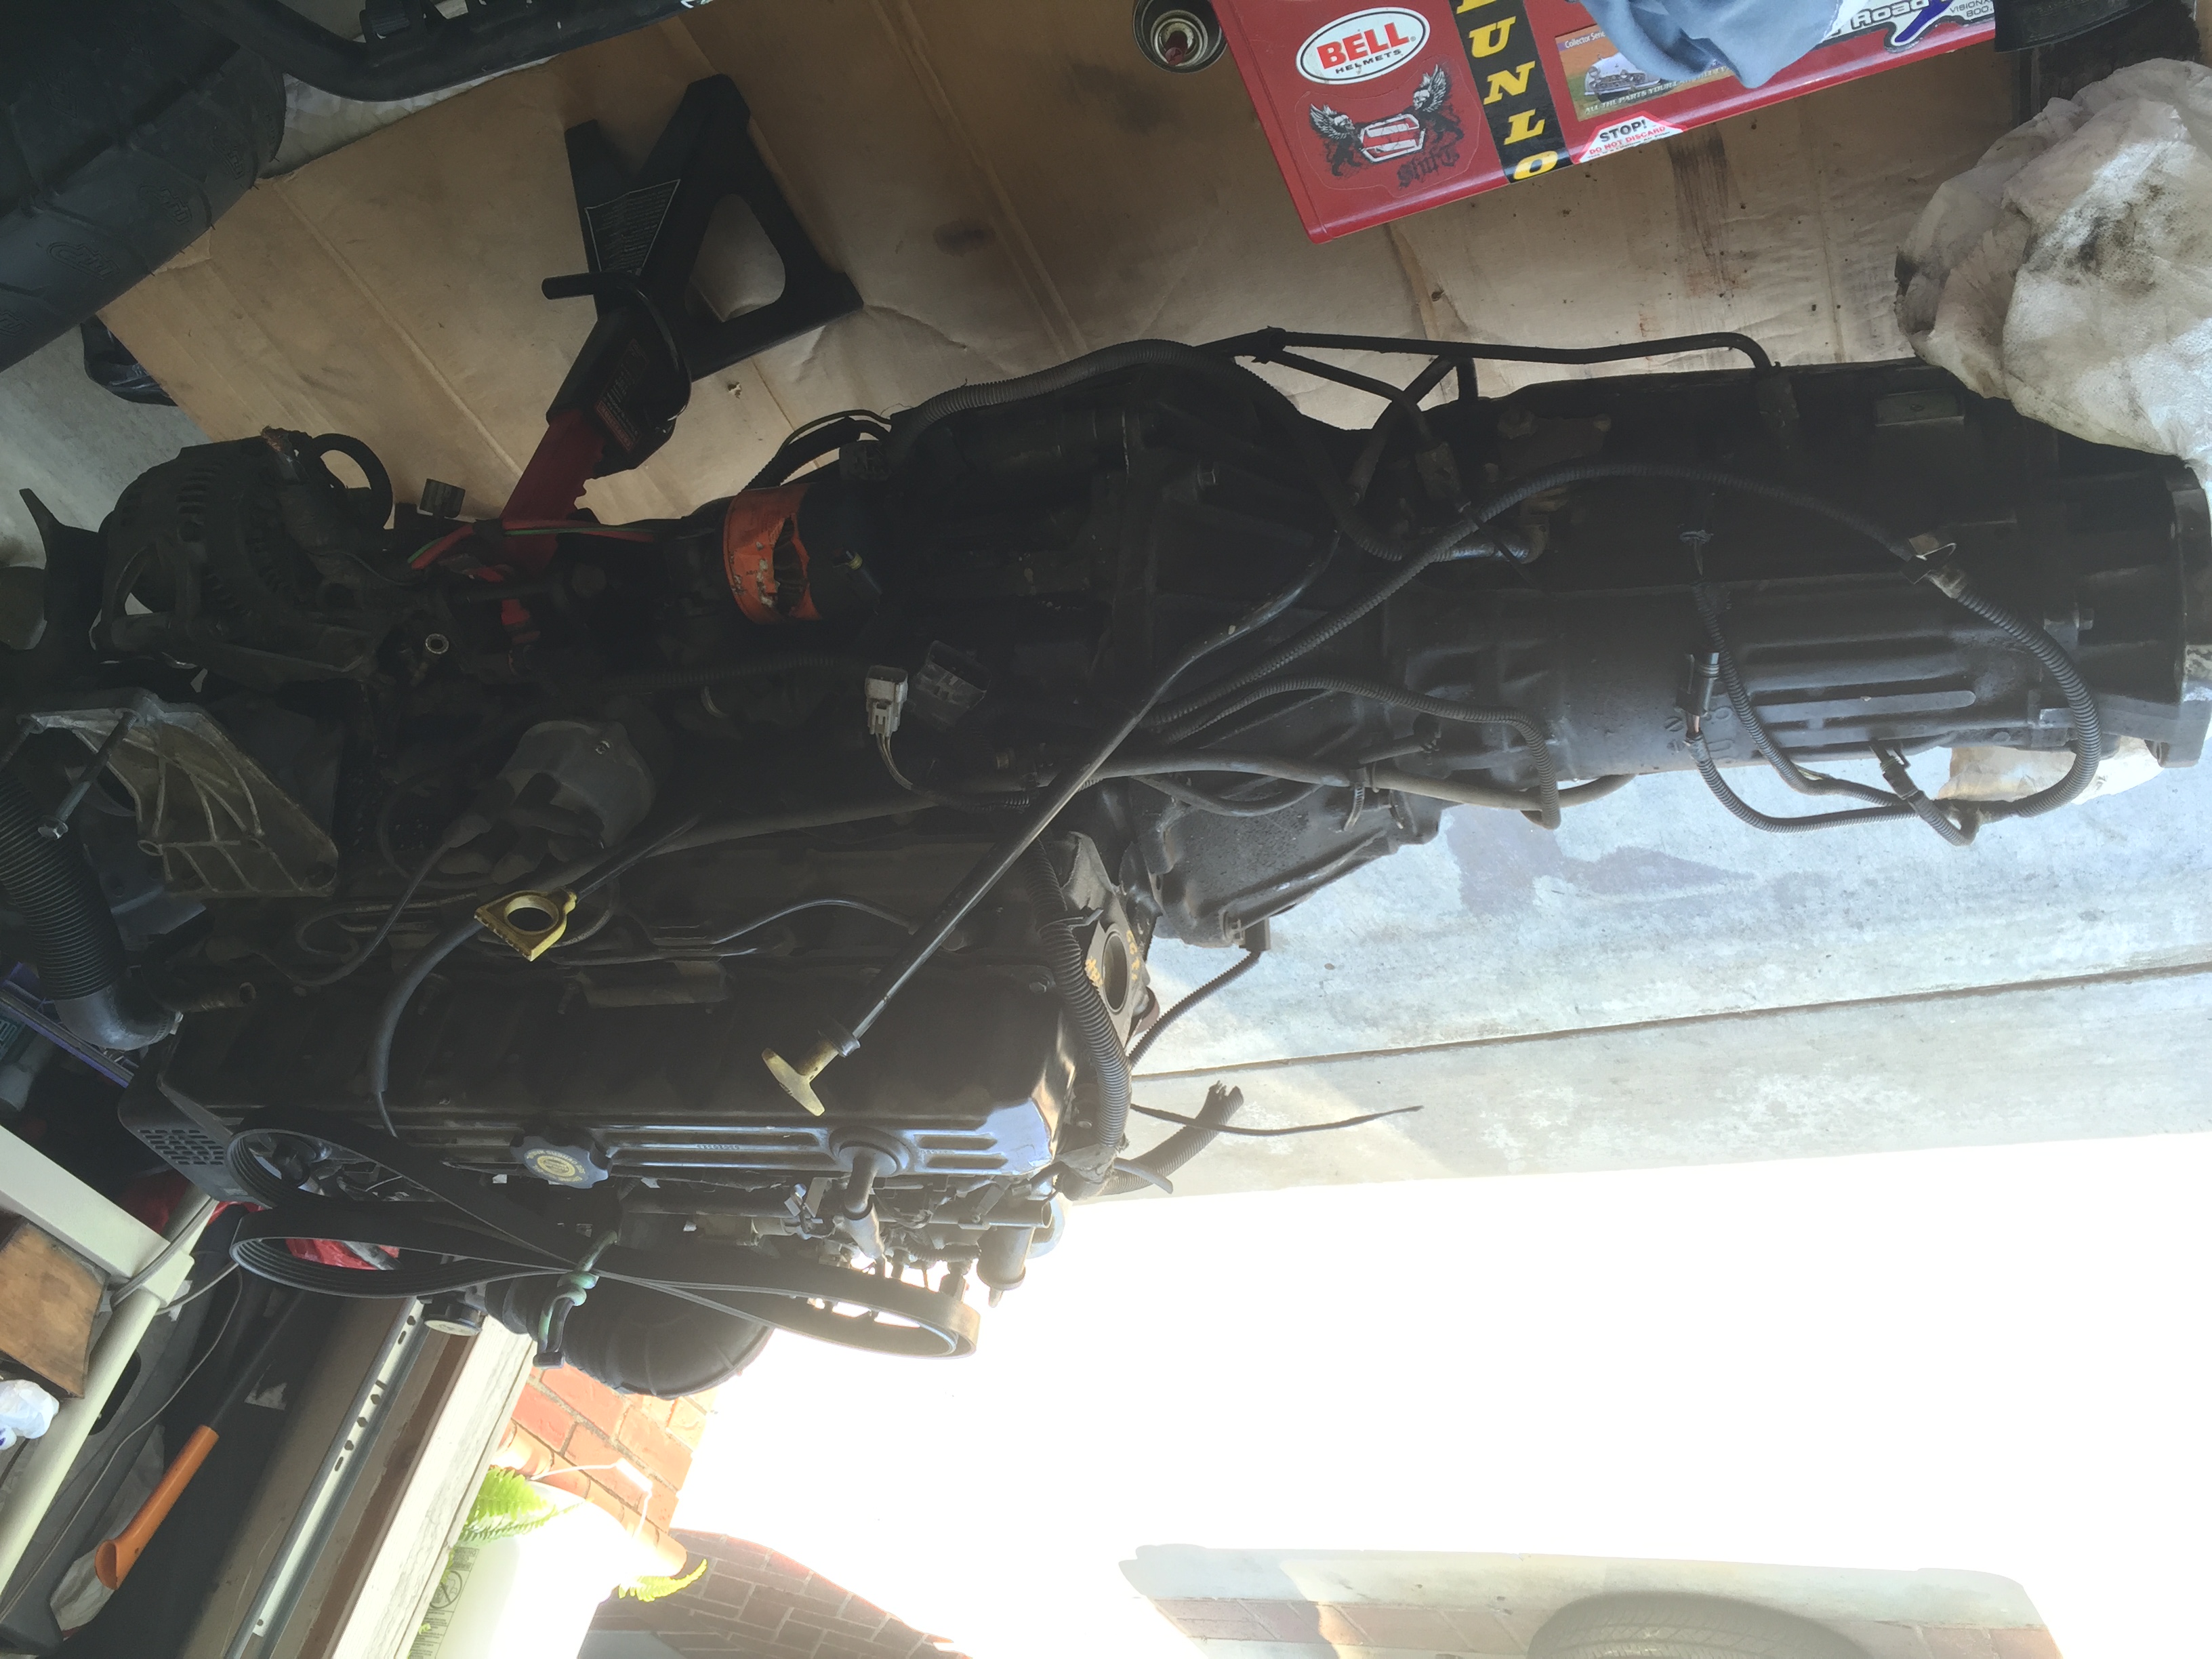 FS [PacSoWest]: 1997 Jeep cherokee 4.0 Engine and Transmission - Jeep